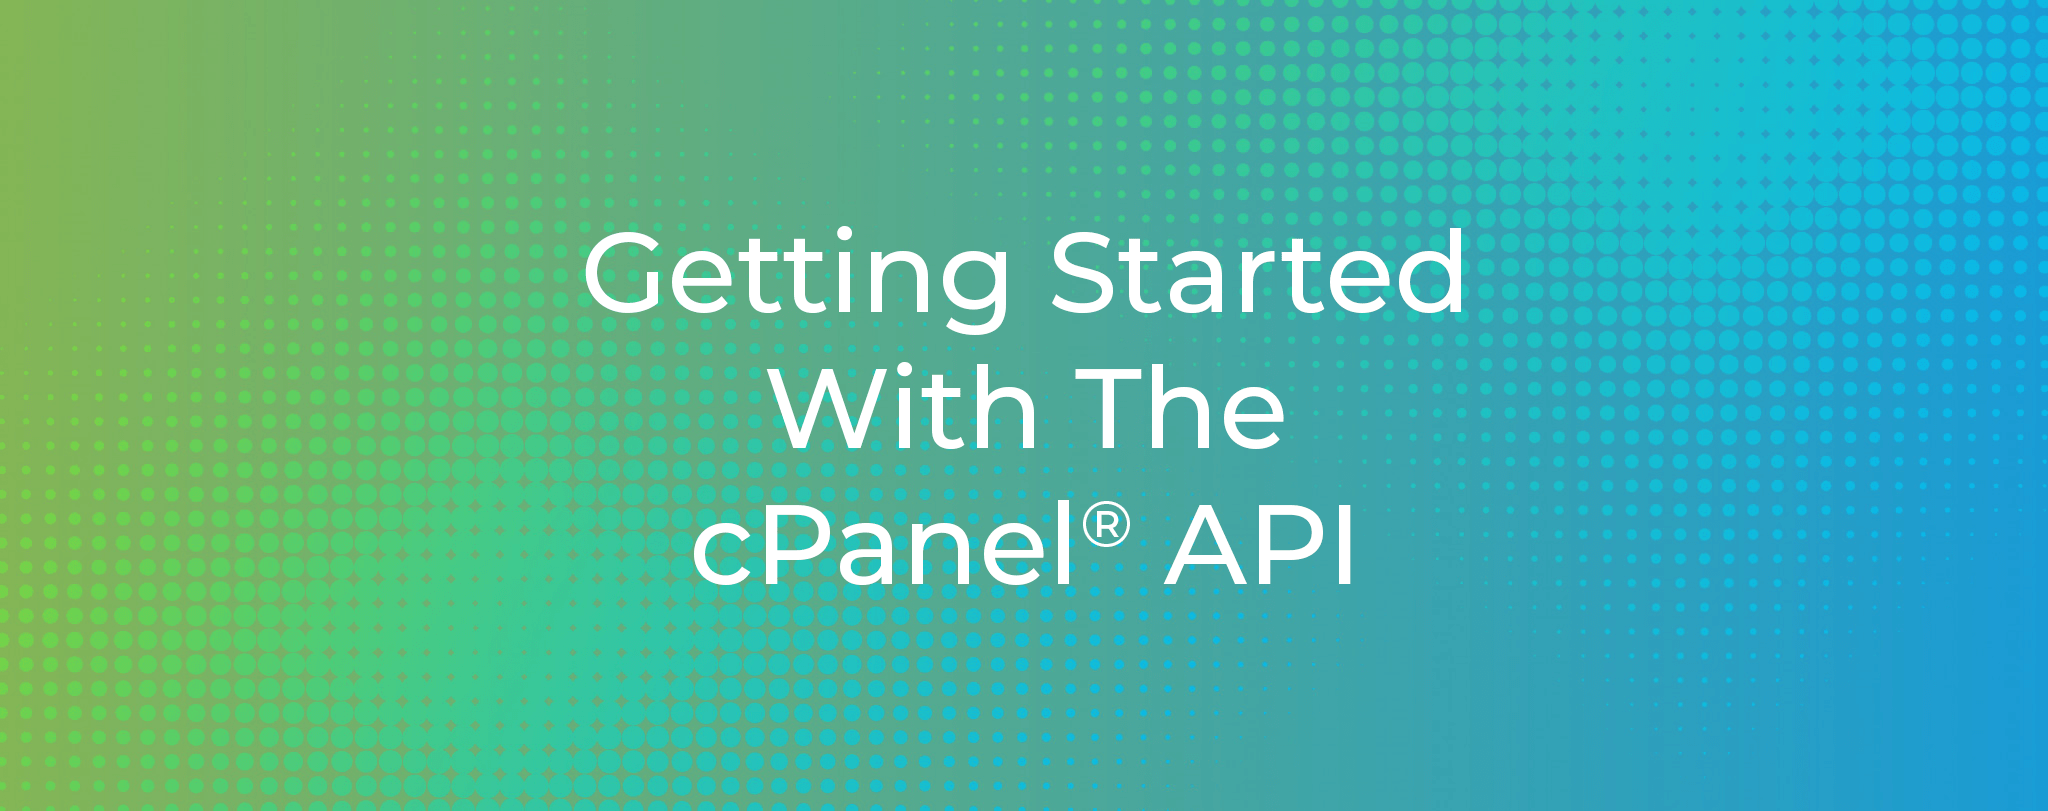 Getting Started With The cPanel API